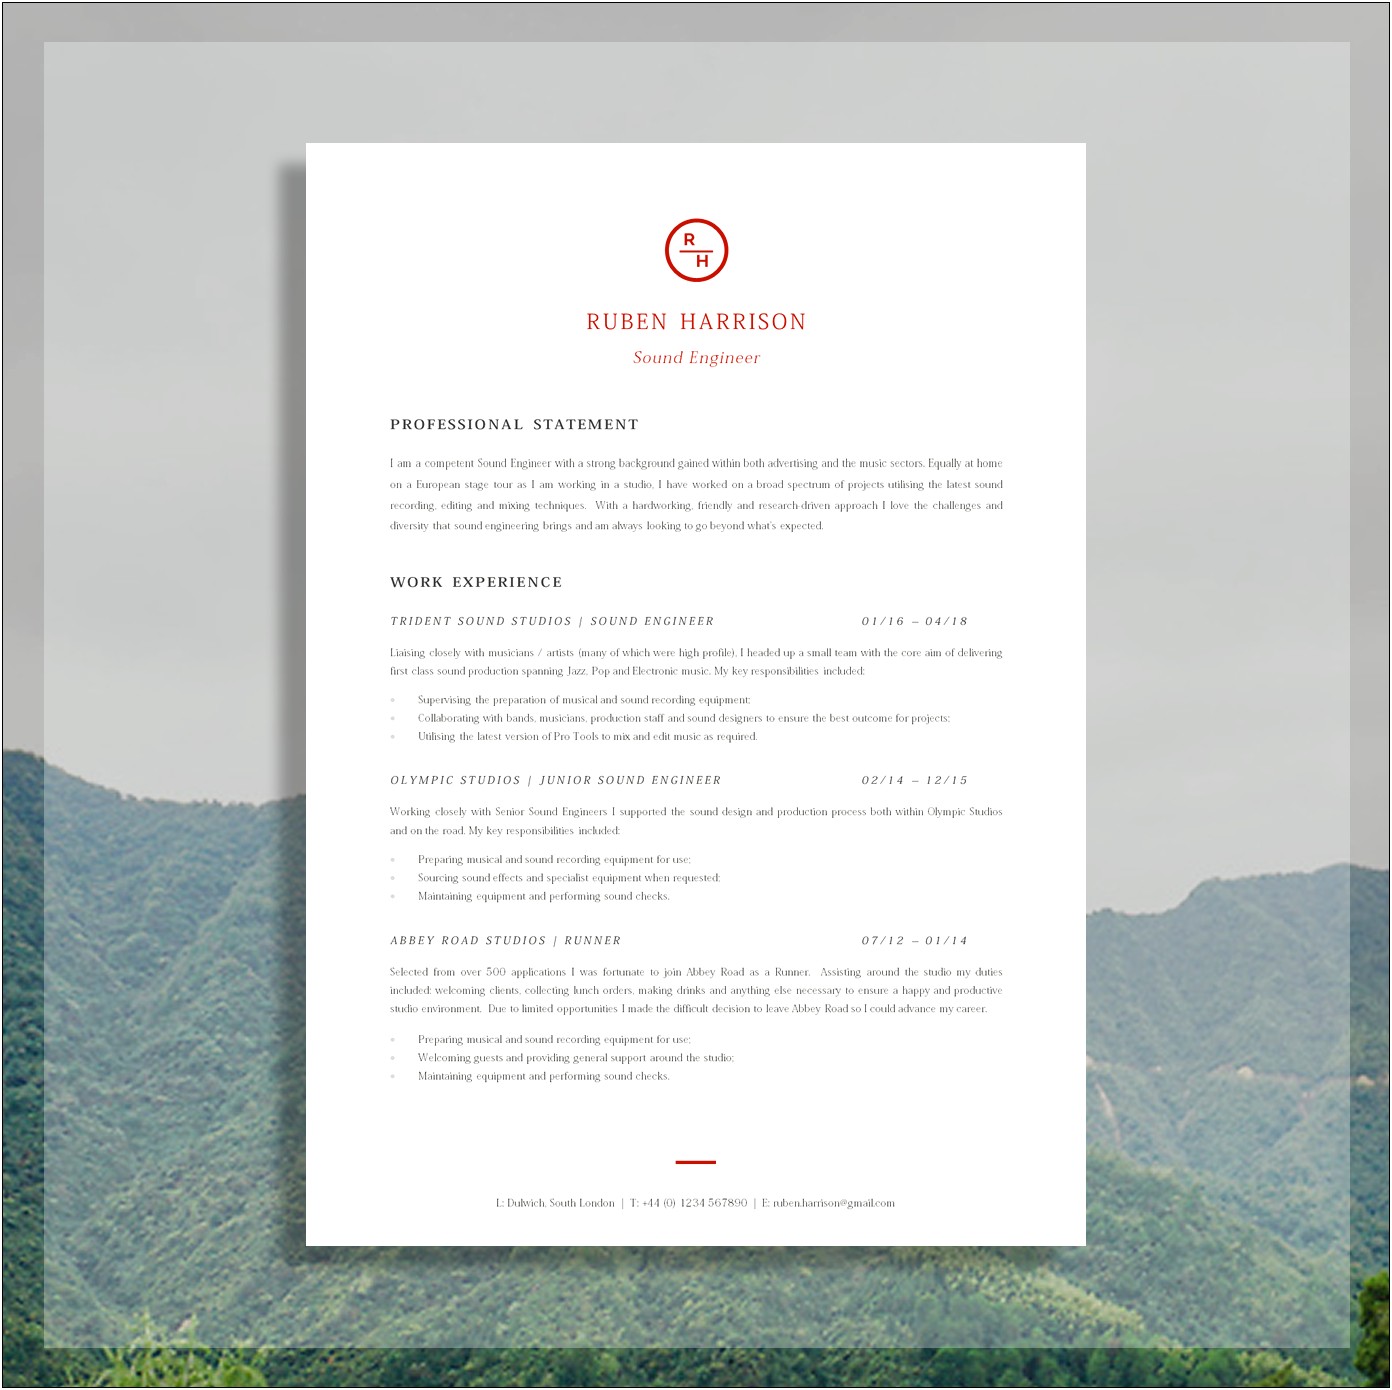 Resume Cover Letter Samples For Sound Recording Engineer